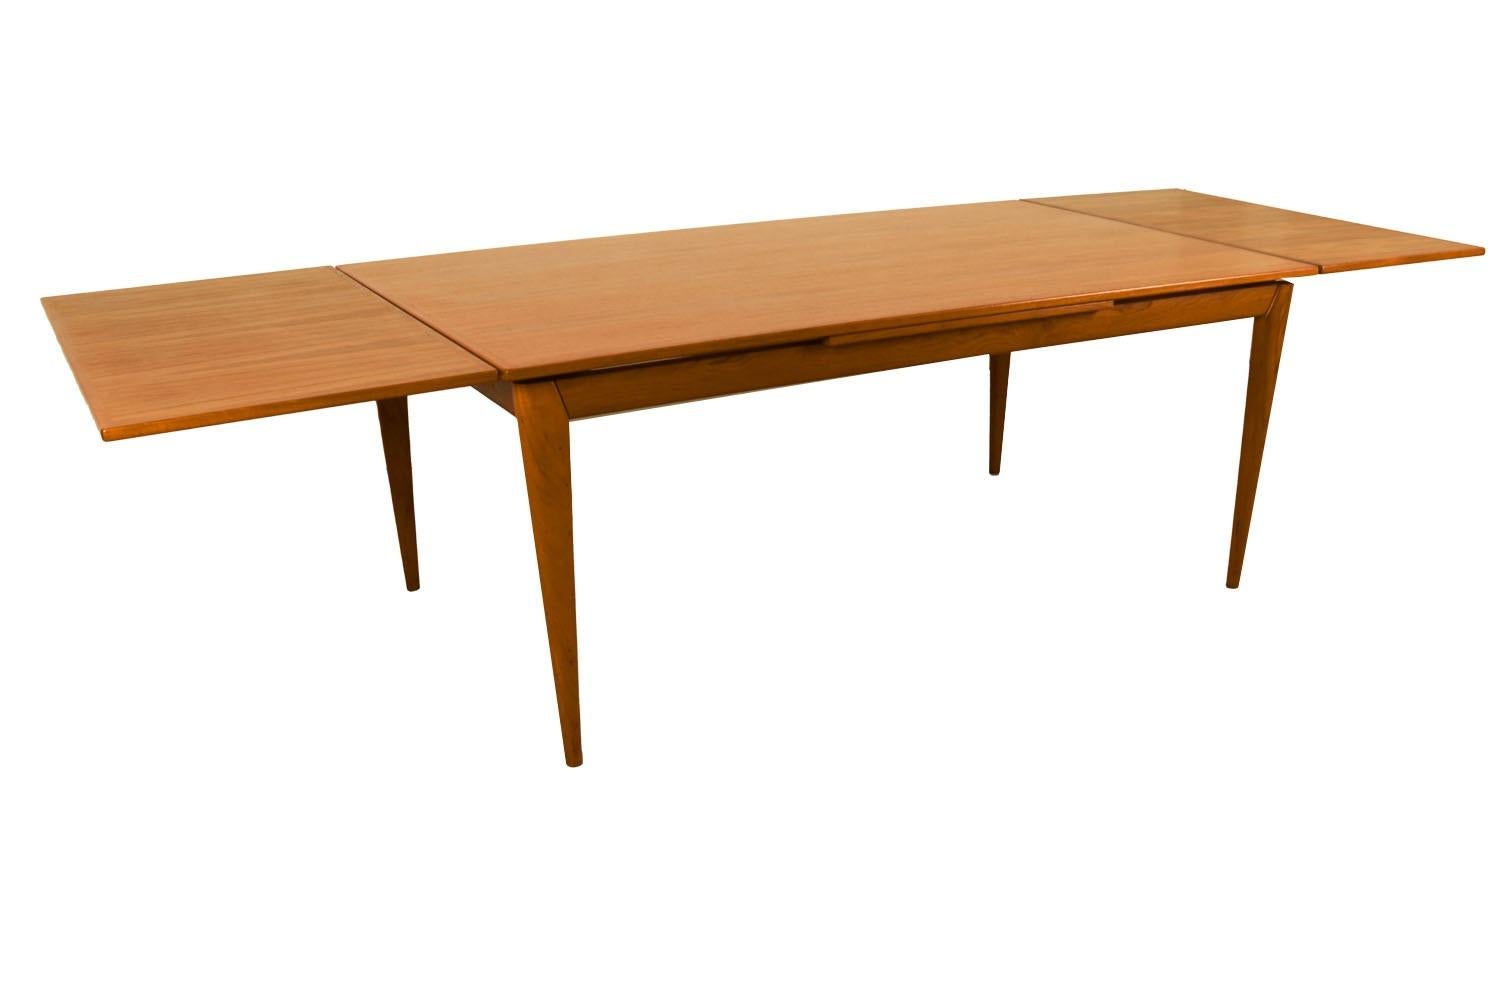 An exceptional Danish Modern teak extension dining table made in Denmark. With an initial large footprint, this table can also offer a generous space and double in size once its hidden draw leaves are extended. Amazing design and construction